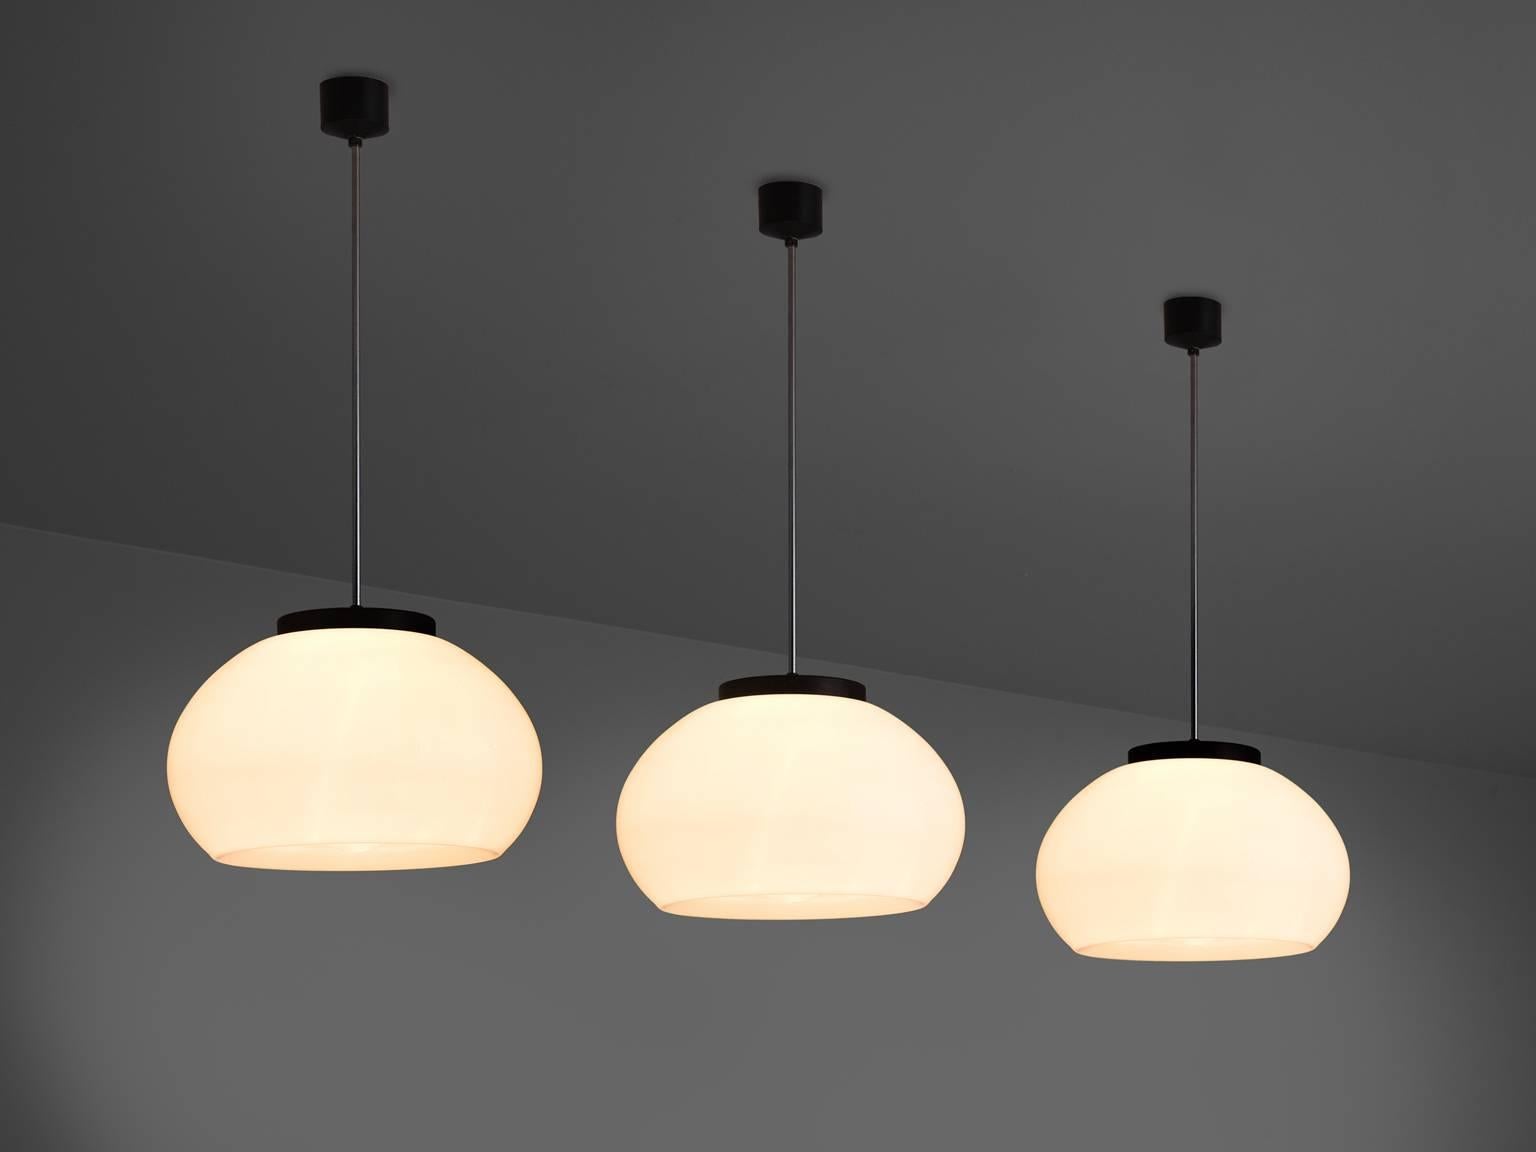 Pendant, opaline glass, metal, Europe, 1970s.

This simplistic, round shape is very lush and organically shaped. The pendants are typically midcentury modern. The opaline glass results in a stunning soft light partition. The contrast of this